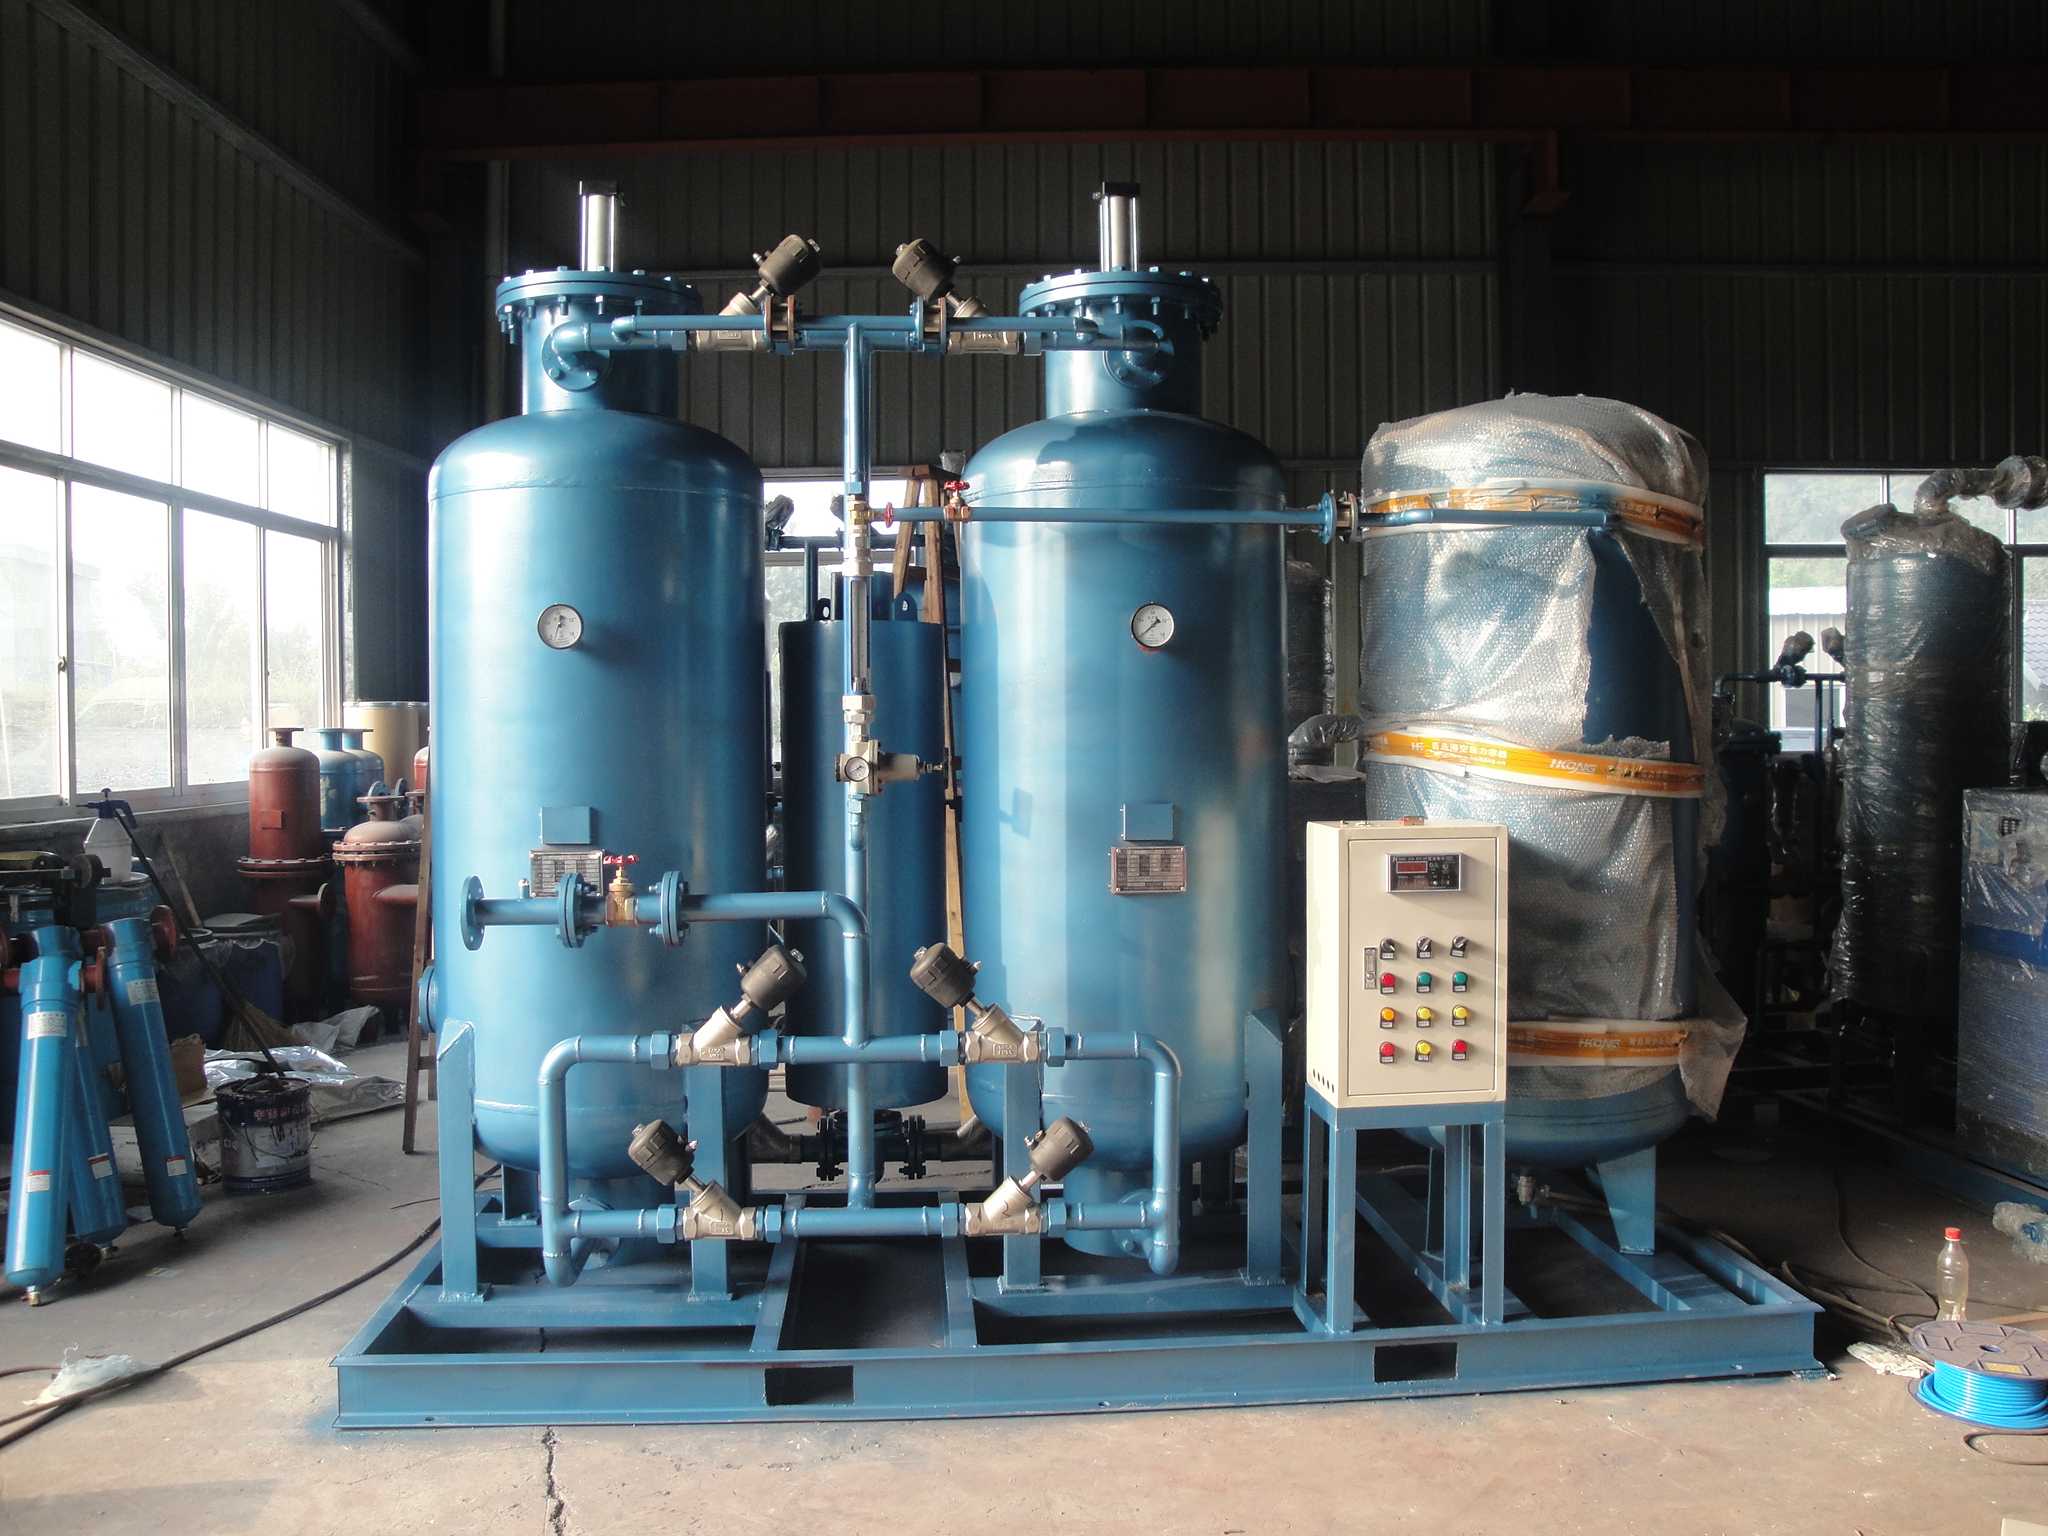 Oxygen making unit ready for shipment-2